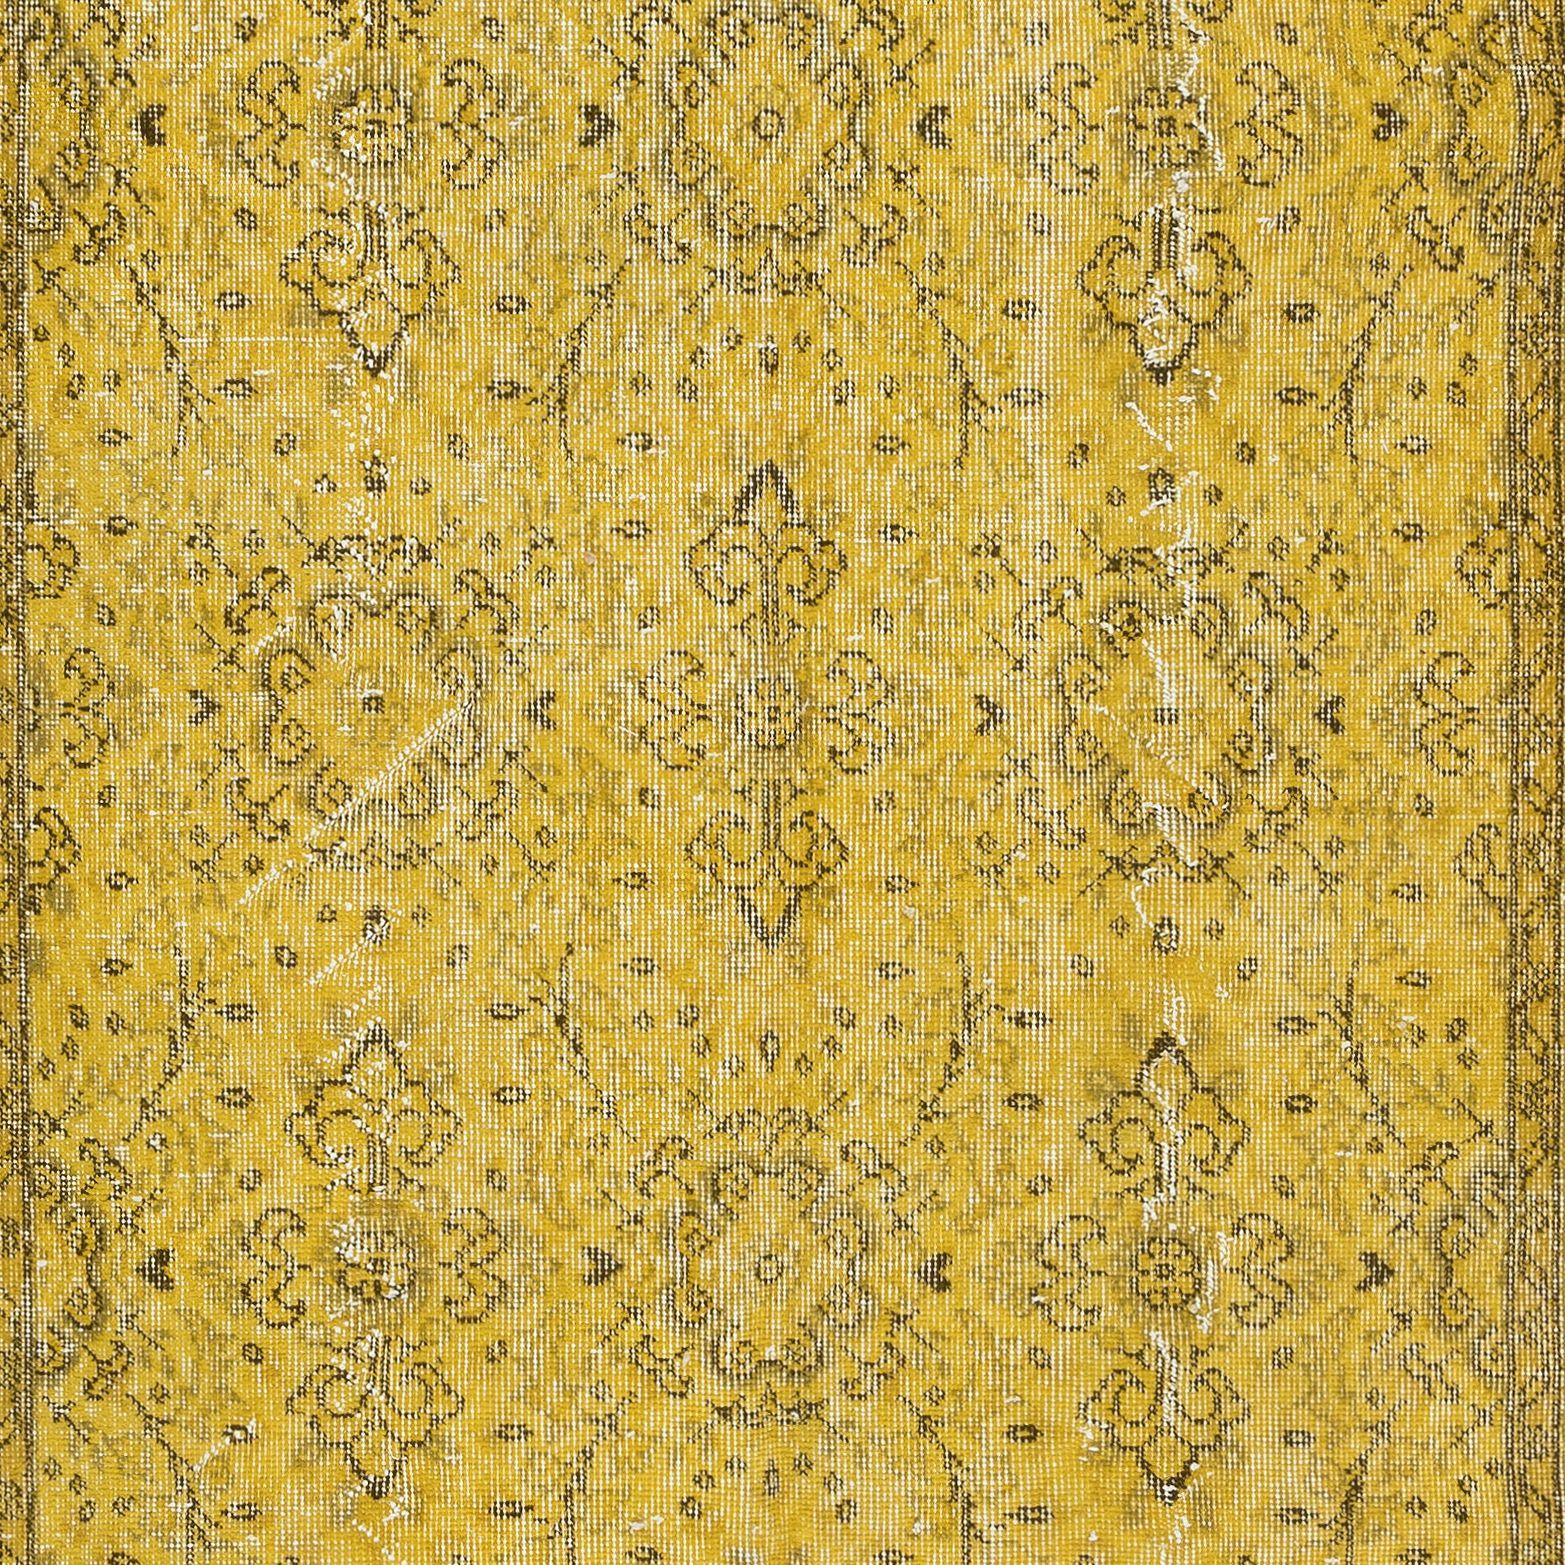 Modern 5x8.6 Ft Upcycled Handmade Turkish Floral Area Rug, Yellow Over-Dyed Carpet For Sale